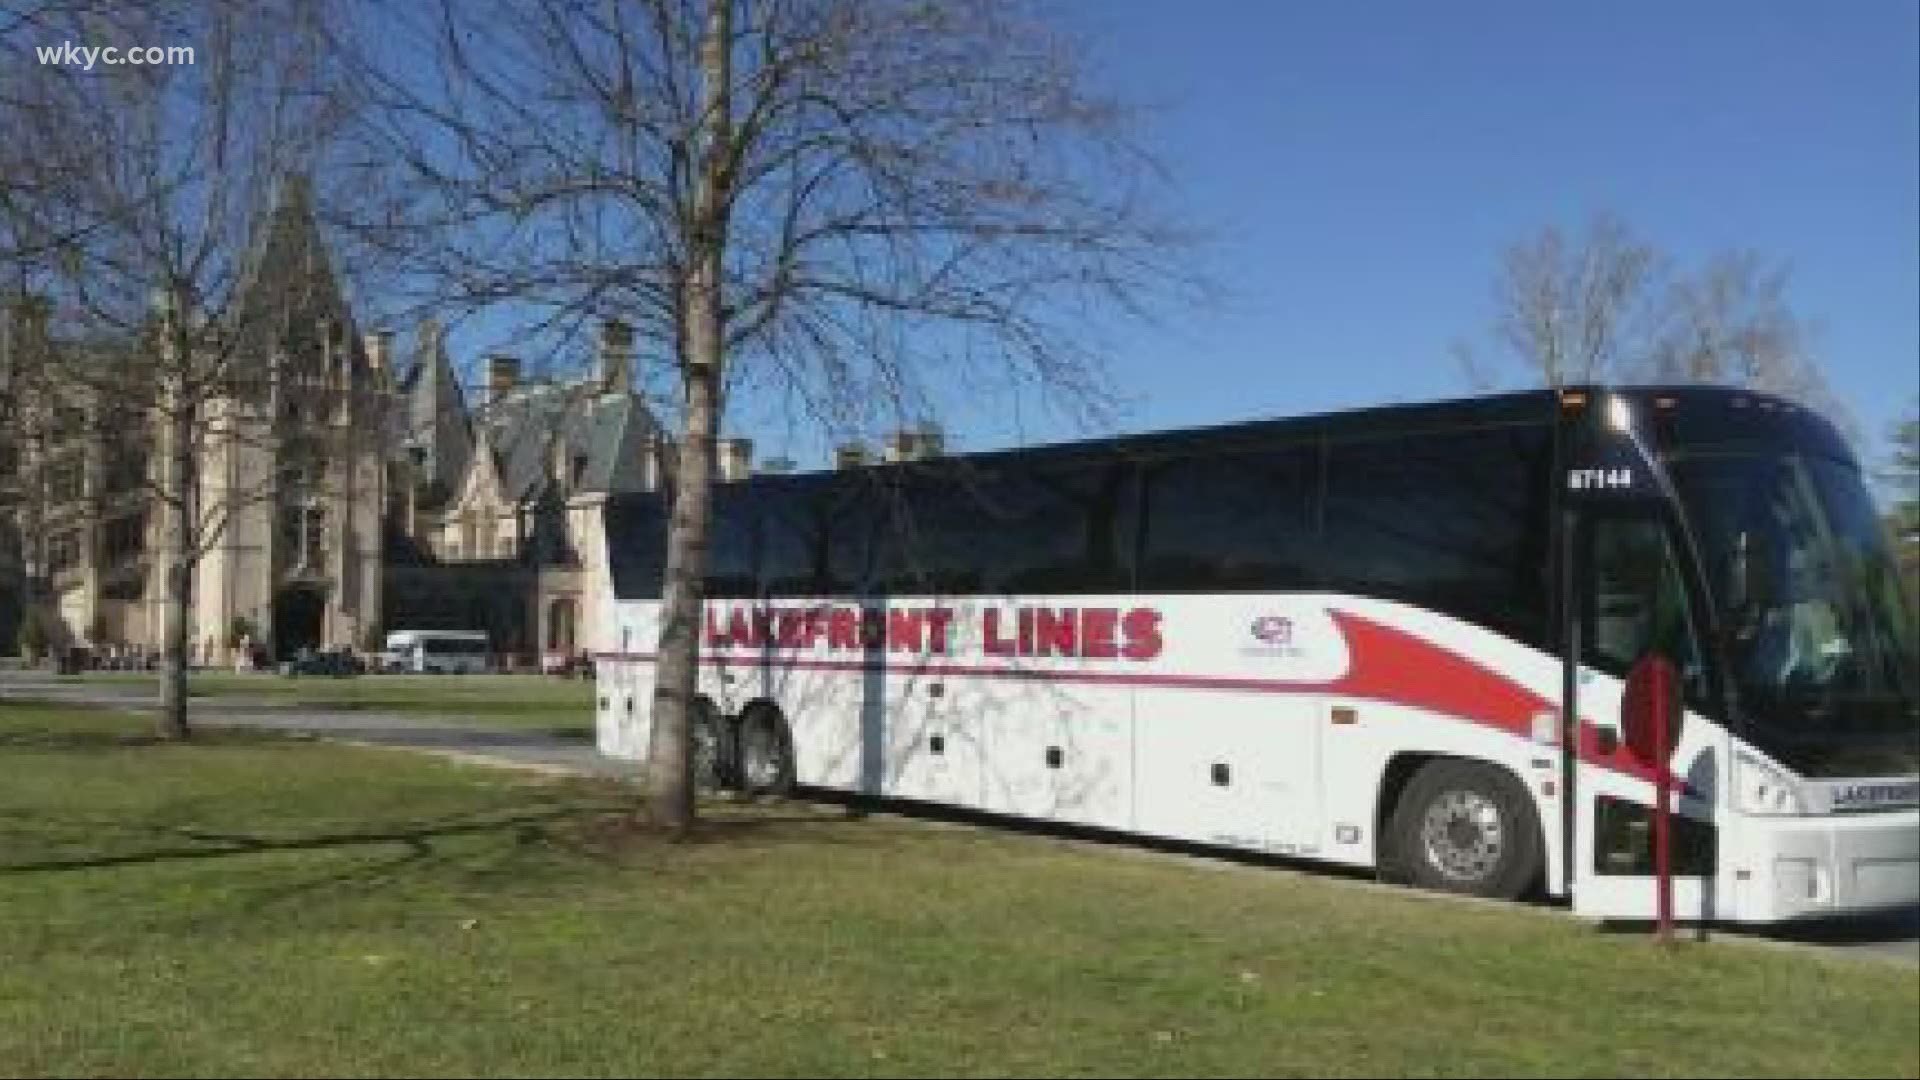 Lakefront Lines' parent company, Coach USA, announced that it is ceasing Lakefront's operations due to the COVID-19 pandemic.This is a developing story.